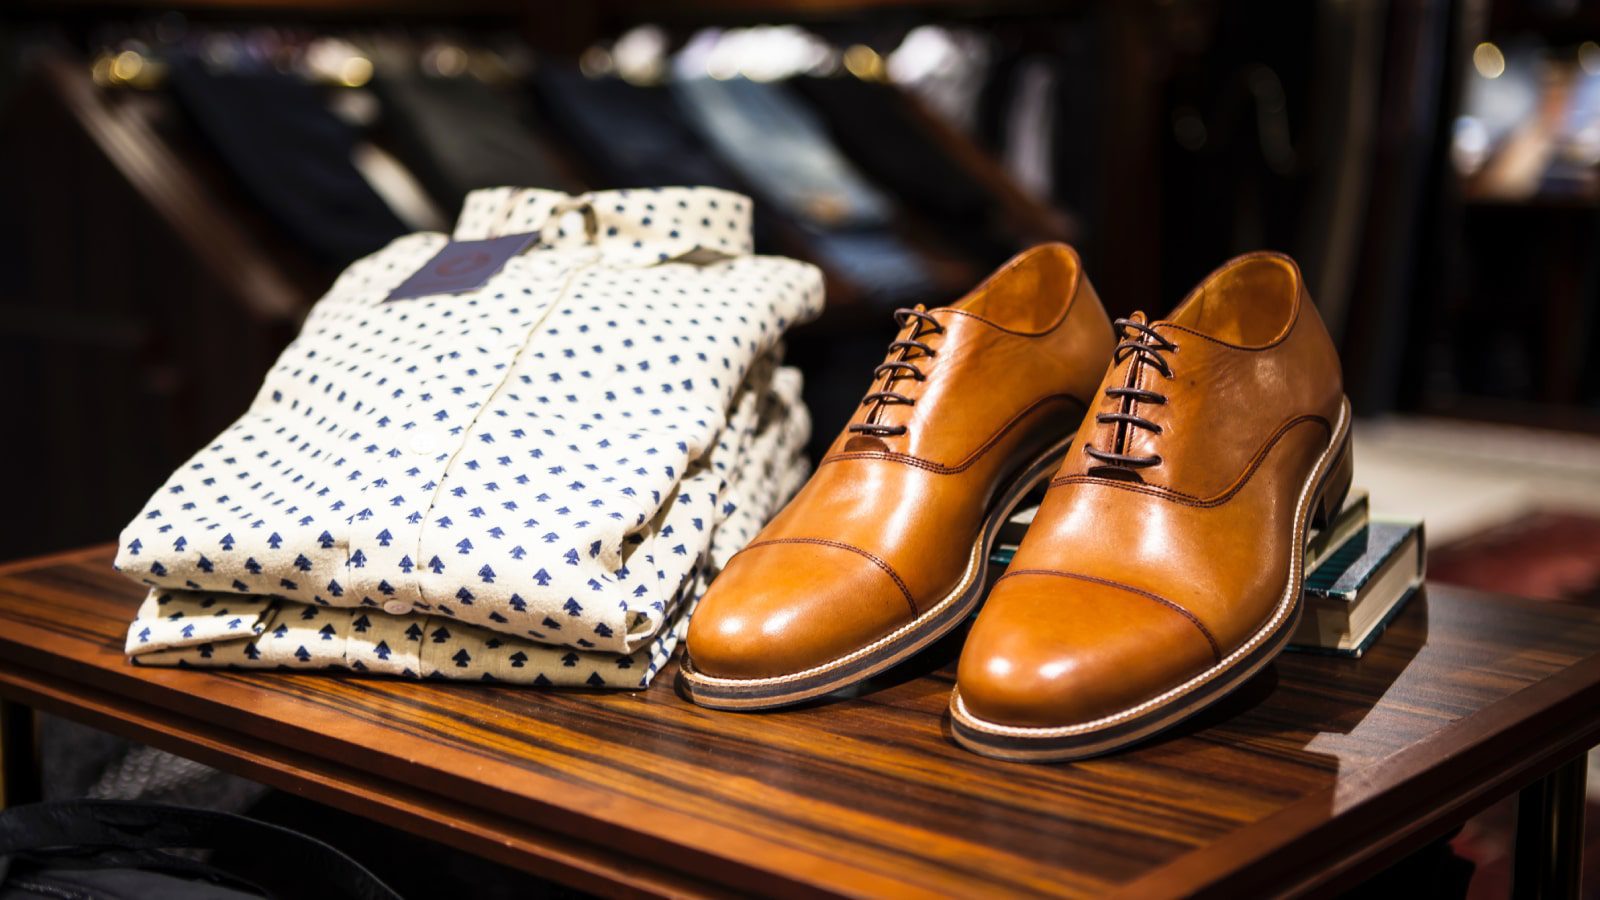 A pair of dress shoes and a button down shirt.